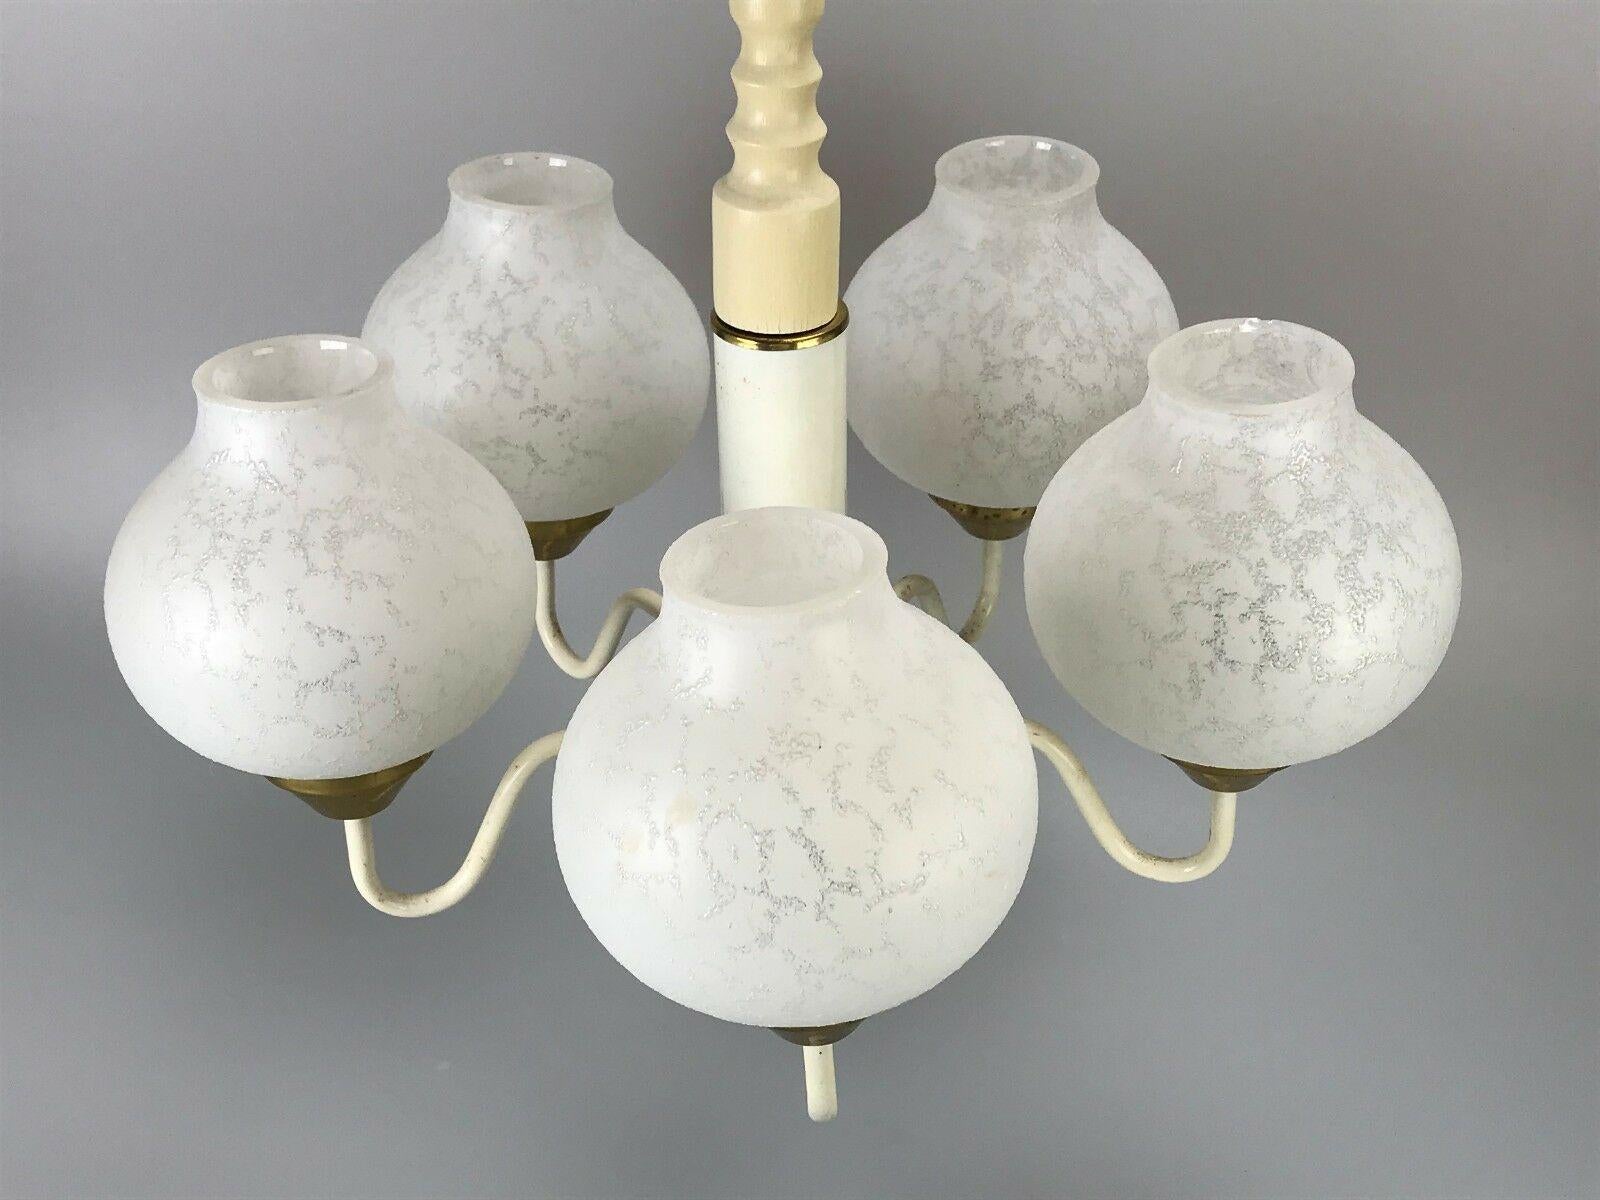 European 70s Lamp Light Ceiling Lamp Hanging Lamp Chandelier Space Age Design For Sale